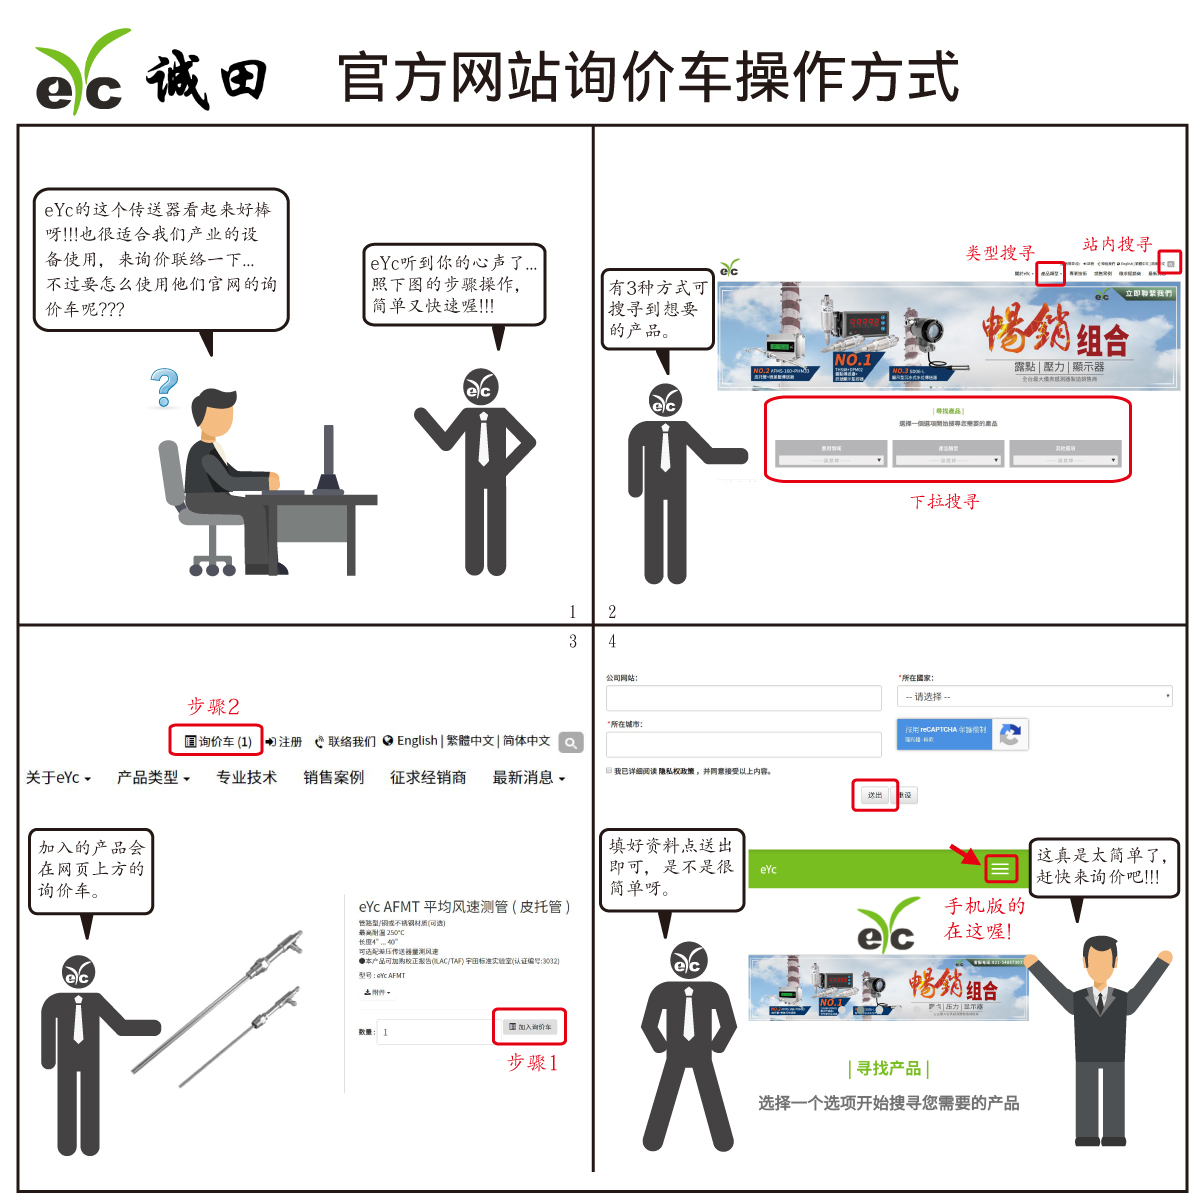 chengtian-how-to-create-a-quotation-with-inquiry-cart_zh-cn.jpg